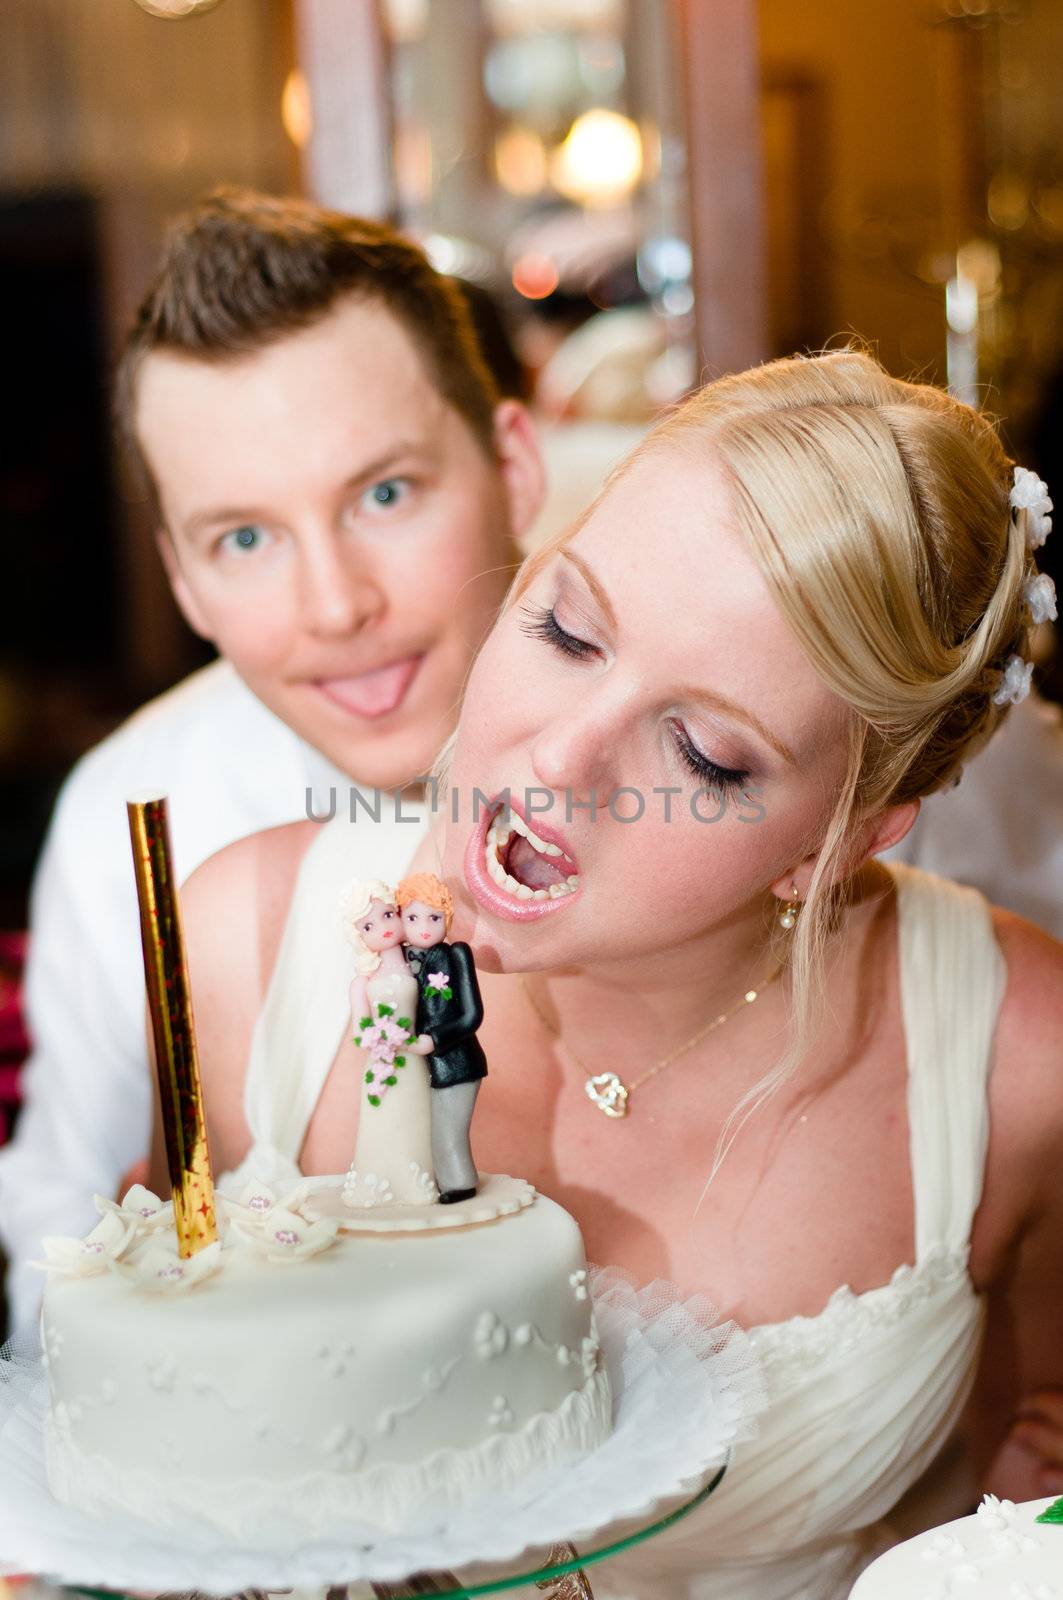 Young bride is going to bite her cake with groom in background by svedoliver